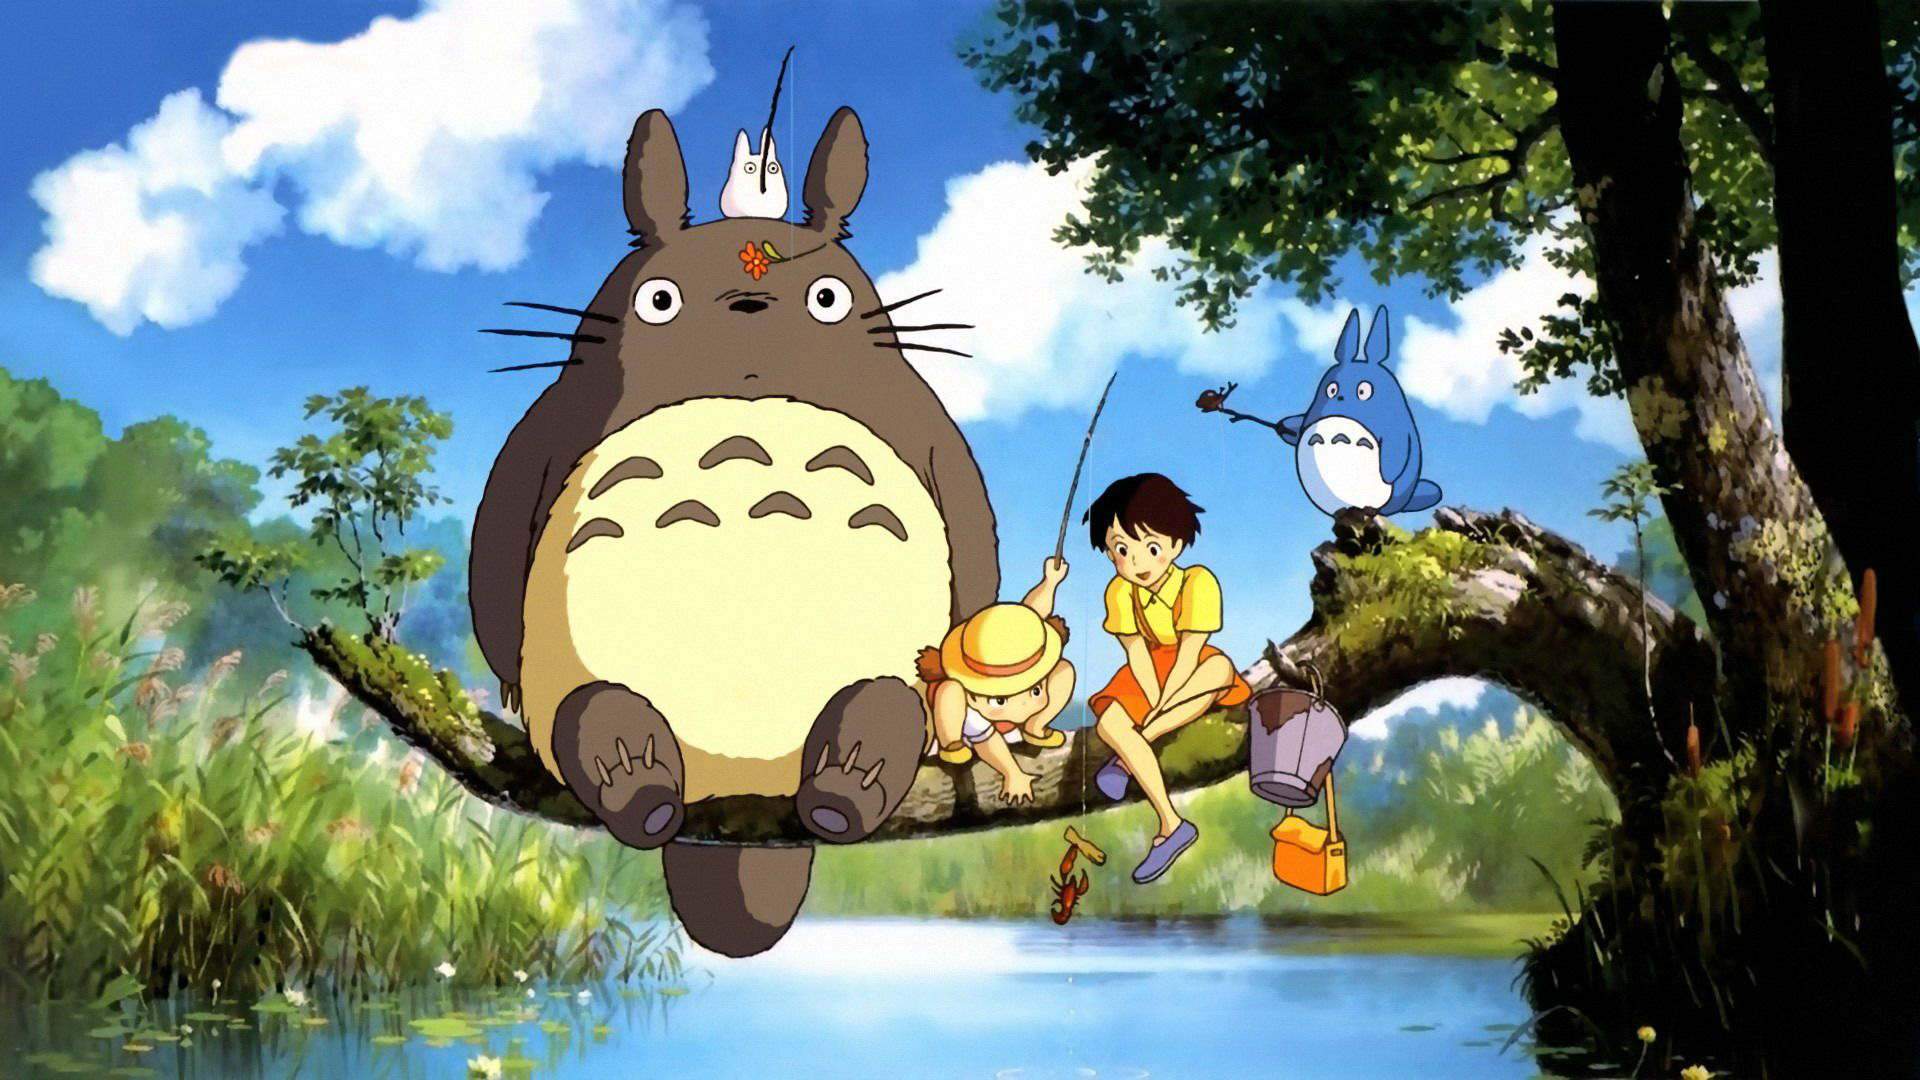 Studio Ghibli Is Building Its Very Own Theme Park